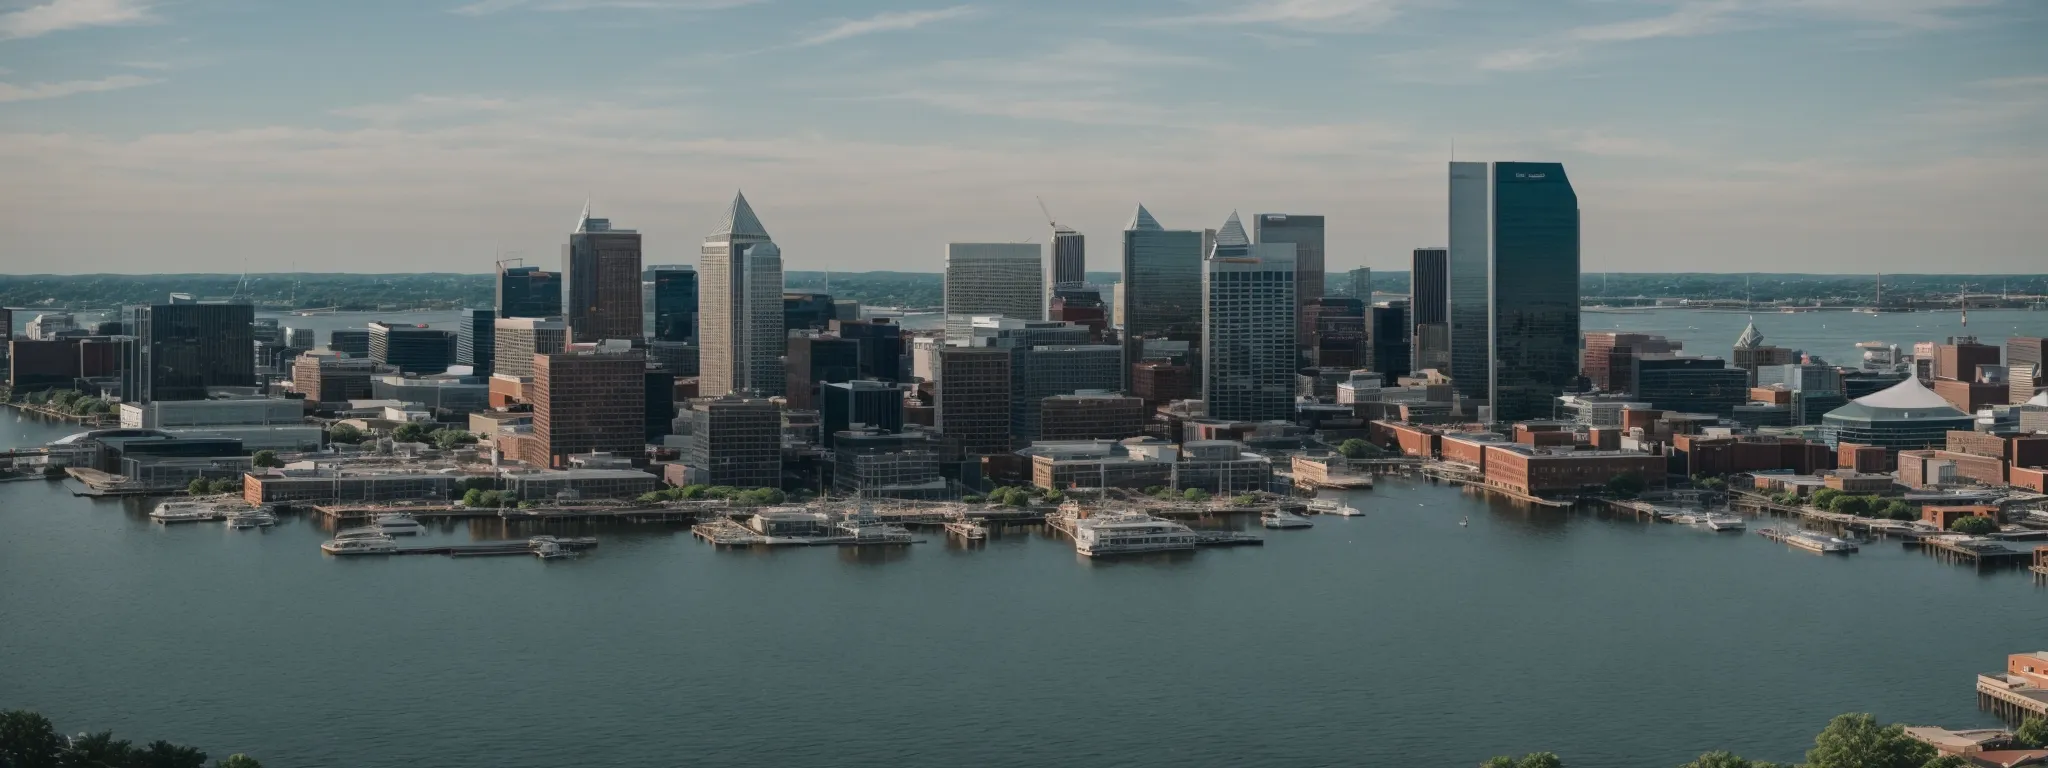 a panoramic view of downtown baltimore's skyline transitioning to the calm waters of the chesapeake bay.